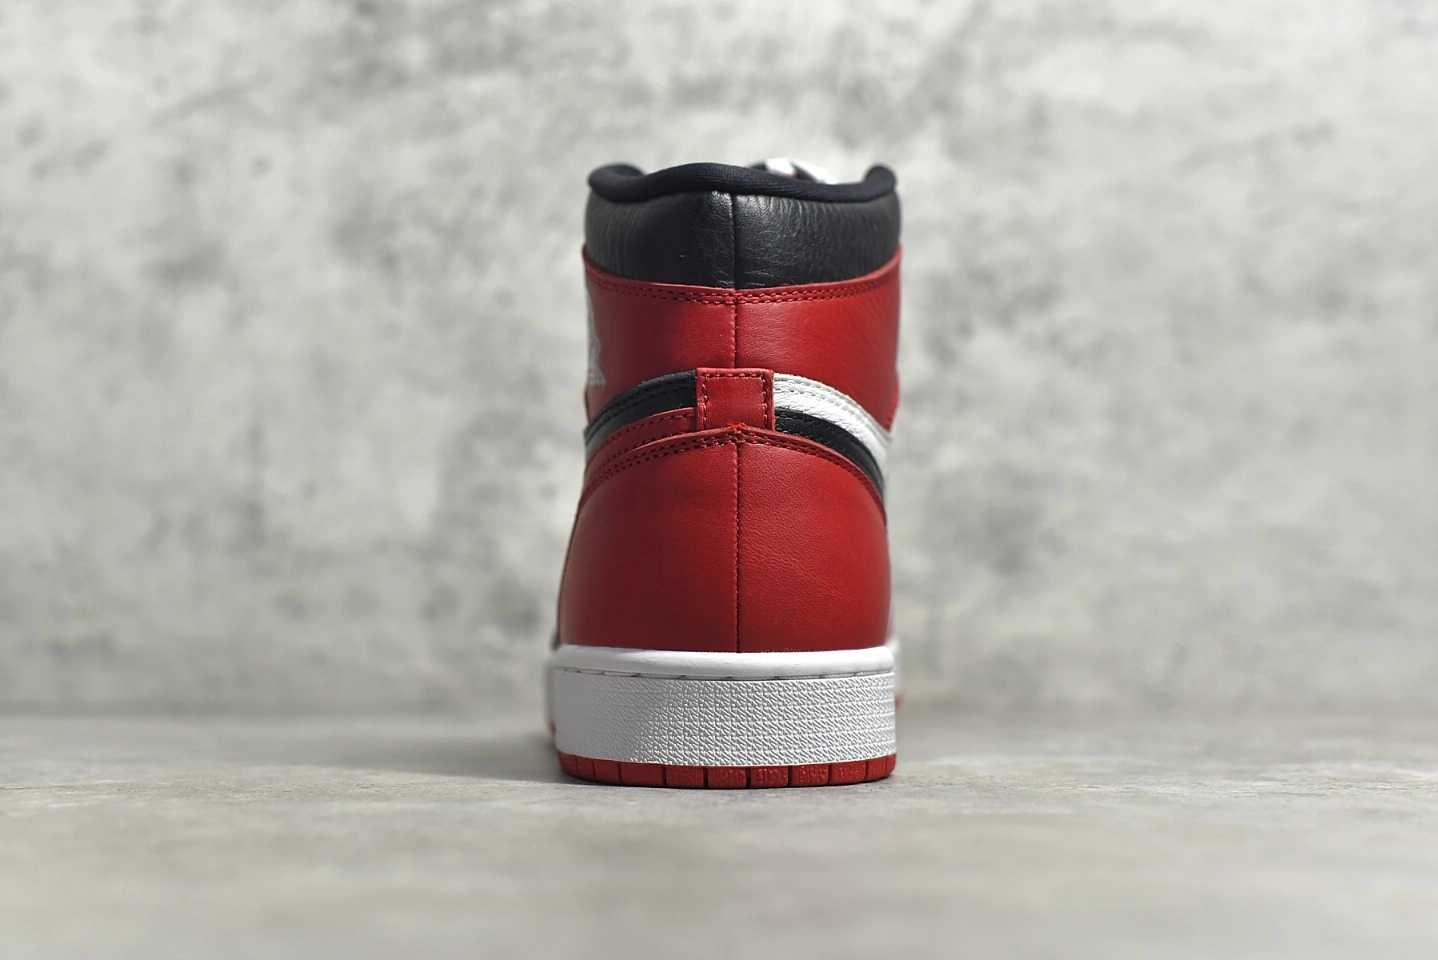 Air Jordan 1 Homage To Home Chicago